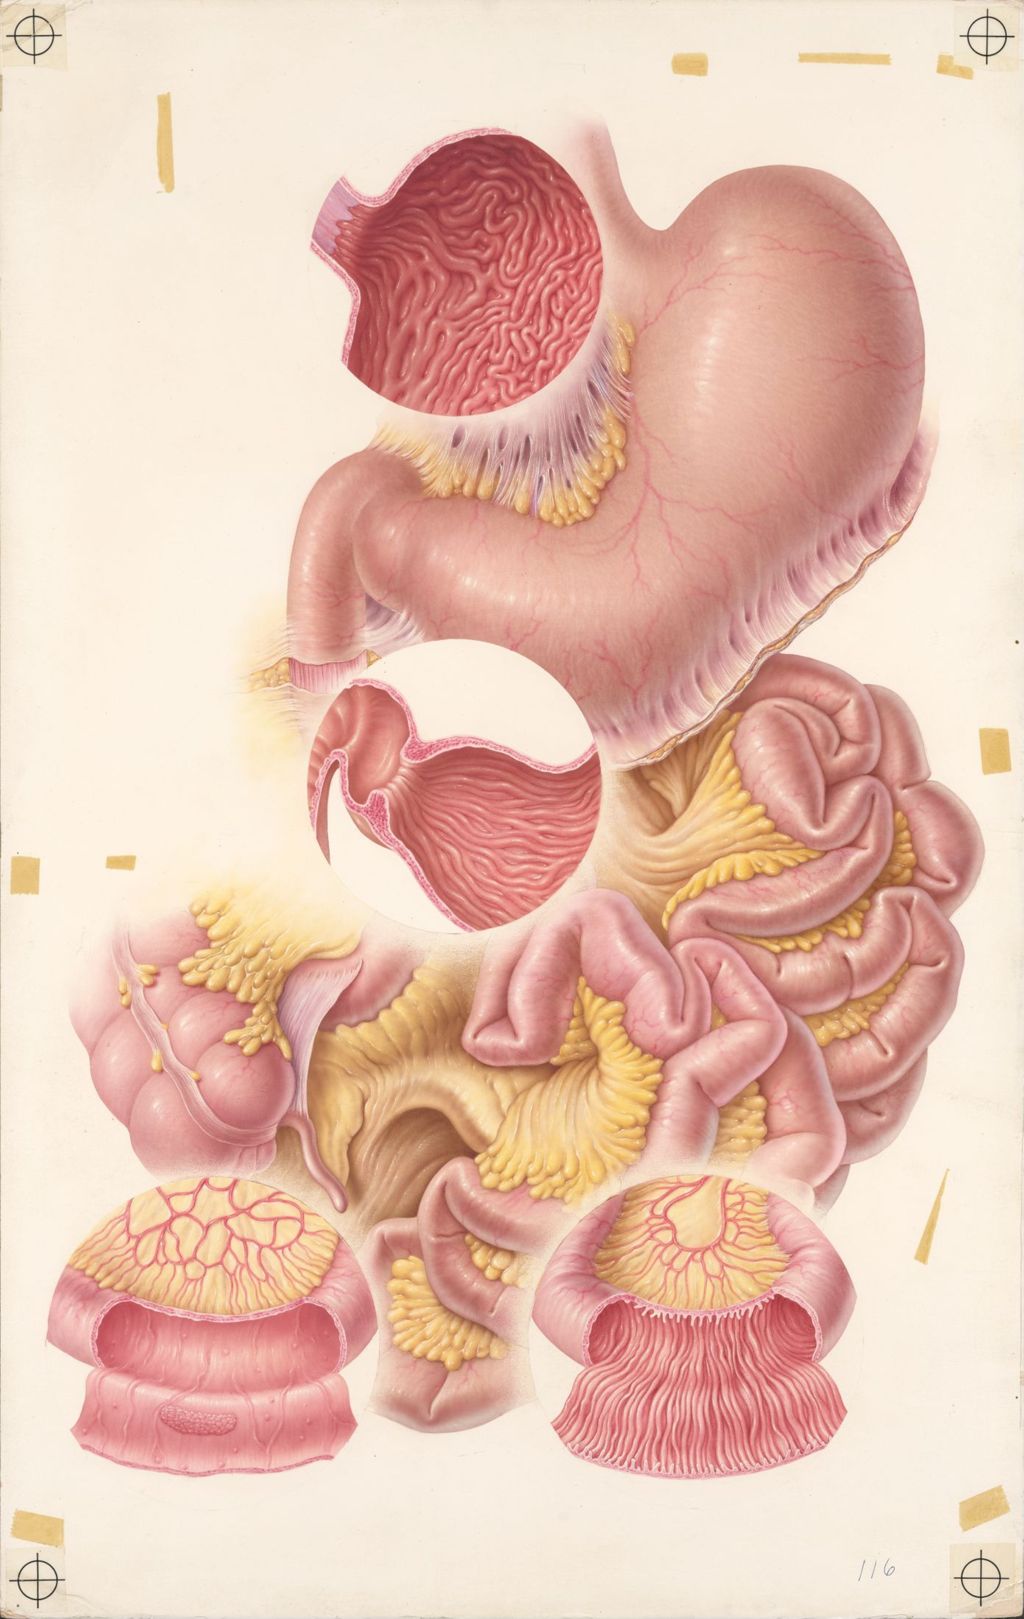 Doctor-Patient Explanatory Atlas of Anatomy, Plate I, External and Internal Appearances of the Stomach and Small Intestine